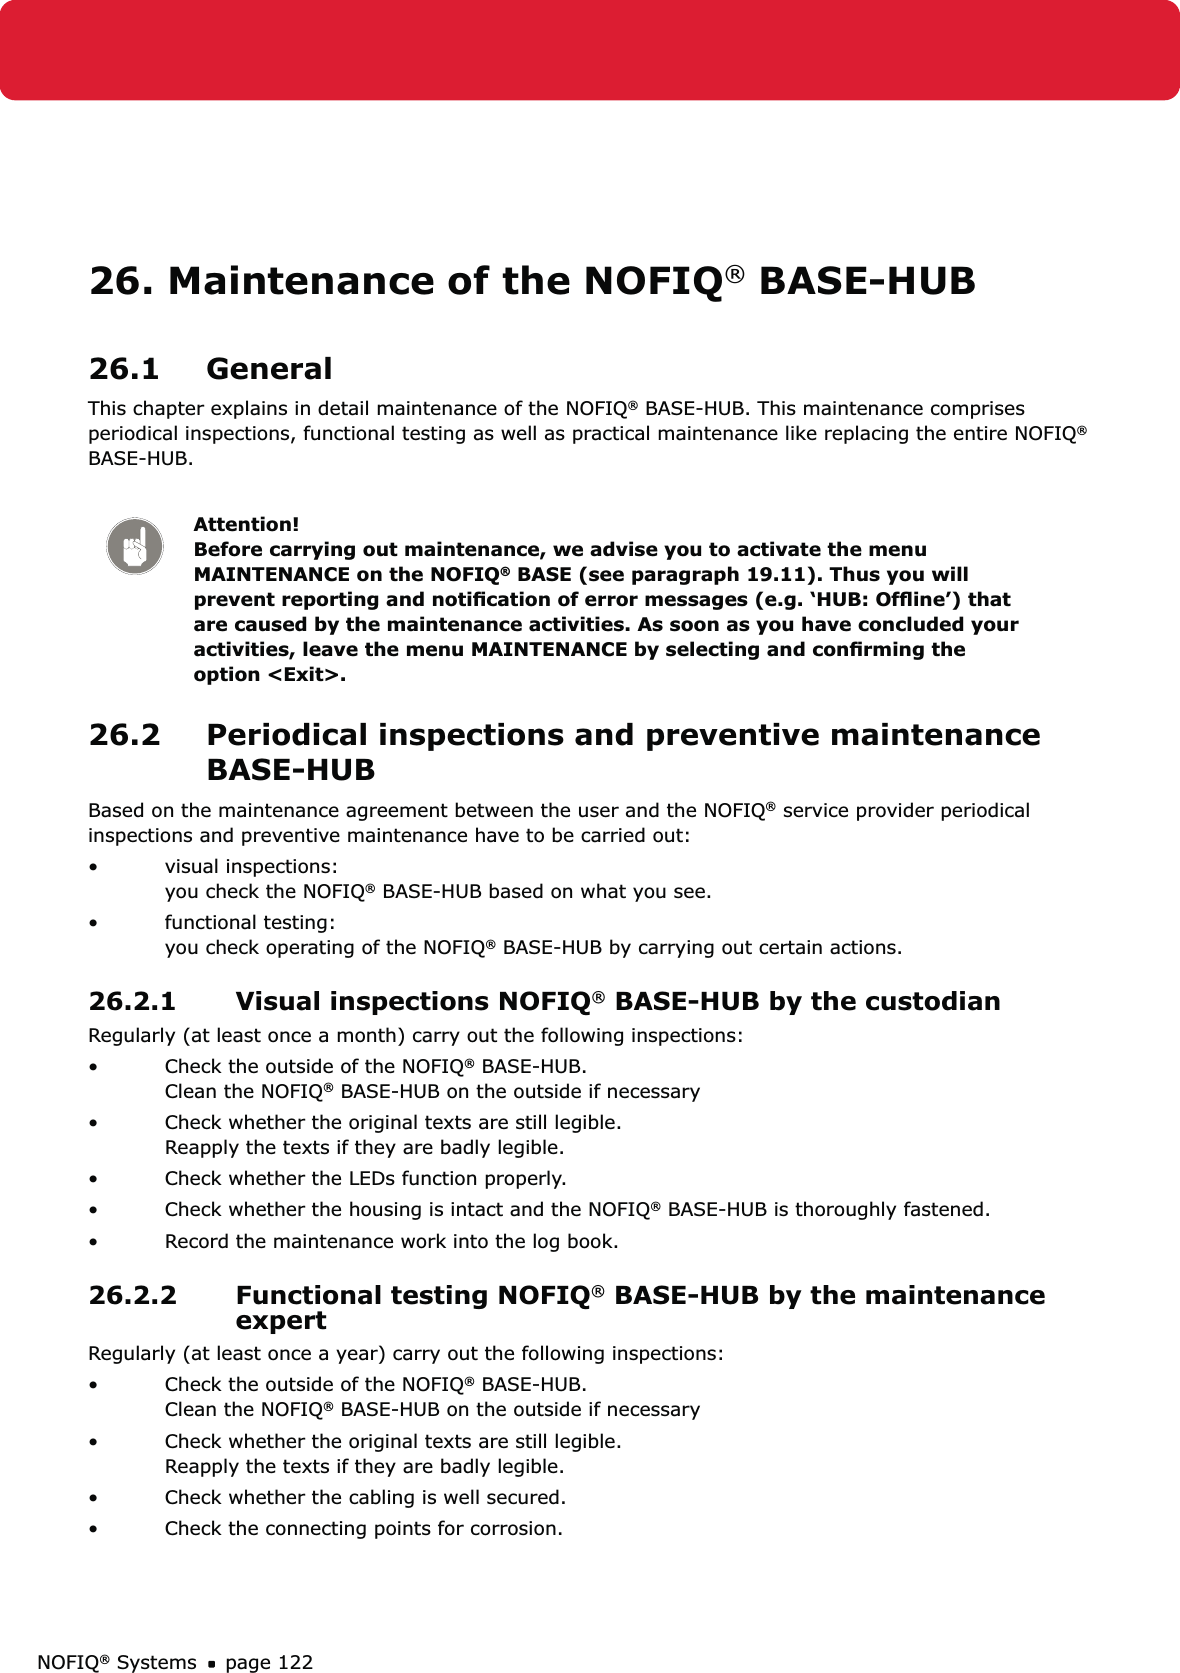 NOFIQ® Systems page 12226. Maintenance of the NOFIQ® BASE-HUB26.1 GeneralThis chapter explains in detail maintenance of the NOFIQ® BASE-HUB. This maintenance comprises periodical inspections, functional testing as well as practical maintenance like replacing the entire NOFIQ® BASE-HUB.Attention! Before carrying out maintenance, we advise you to activate the menu MAINTENANCE on the NOFIQ® BASE (see paragraph 19.11). Thus you will prevent reporting and notiﬁcation of error messages (e.g. ‘HUB: Ofﬂine’) that are caused by the maintenance activities. As soon as you have concluded your activities, leave the menu MAINTENANCE by selecting and conﬁrming the option &lt;Exit&gt;.26.2  Periodical inspections and preventive maintenance BASE-HUBBased on the maintenance agreement between the user and the NOFIQ® service provider periodical inspections and preventive maintenance have to be carried out:visual inspections: • you check the NOFIQ® BASE-HUB based on what you see.functional testing: • you check operating of the NOFIQ® BASE-HUB by carrying out certain actions.26.2.1  Visual inspections NOFIQ® BASE-HUB by the custodian Regularly (at least once a month) carry out the following inspections:Check the outside of the NOFIQ•  ® BASE-HUB. Clean the NOFIQ® BASE-HUB on the outside if necessaryCheck whether the original texts are still legible. • Reapply the texts if they are badly legible.Check whether the LEDs function properly.• Check whether the housing is intact and the NOFIQ•  ® BASE-HUB is thoroughly fastened.Record the maintenance work into the log book.• 26.2.2  Functional testing NOFIQ® BASE-HUB by the maintenance expert Regularly (at least once a year) carry out the following inspections:Check the outside of the NOFIQ•  ® BASE-HUB. Clean the NOFIQ® BASE-HUB on the outside if necessaryCheck whether the original texts are still legible. • Reapply the texts if they are badly legible.Check whether the cabling is well secured.• Check the connecting points for corrosion.• 